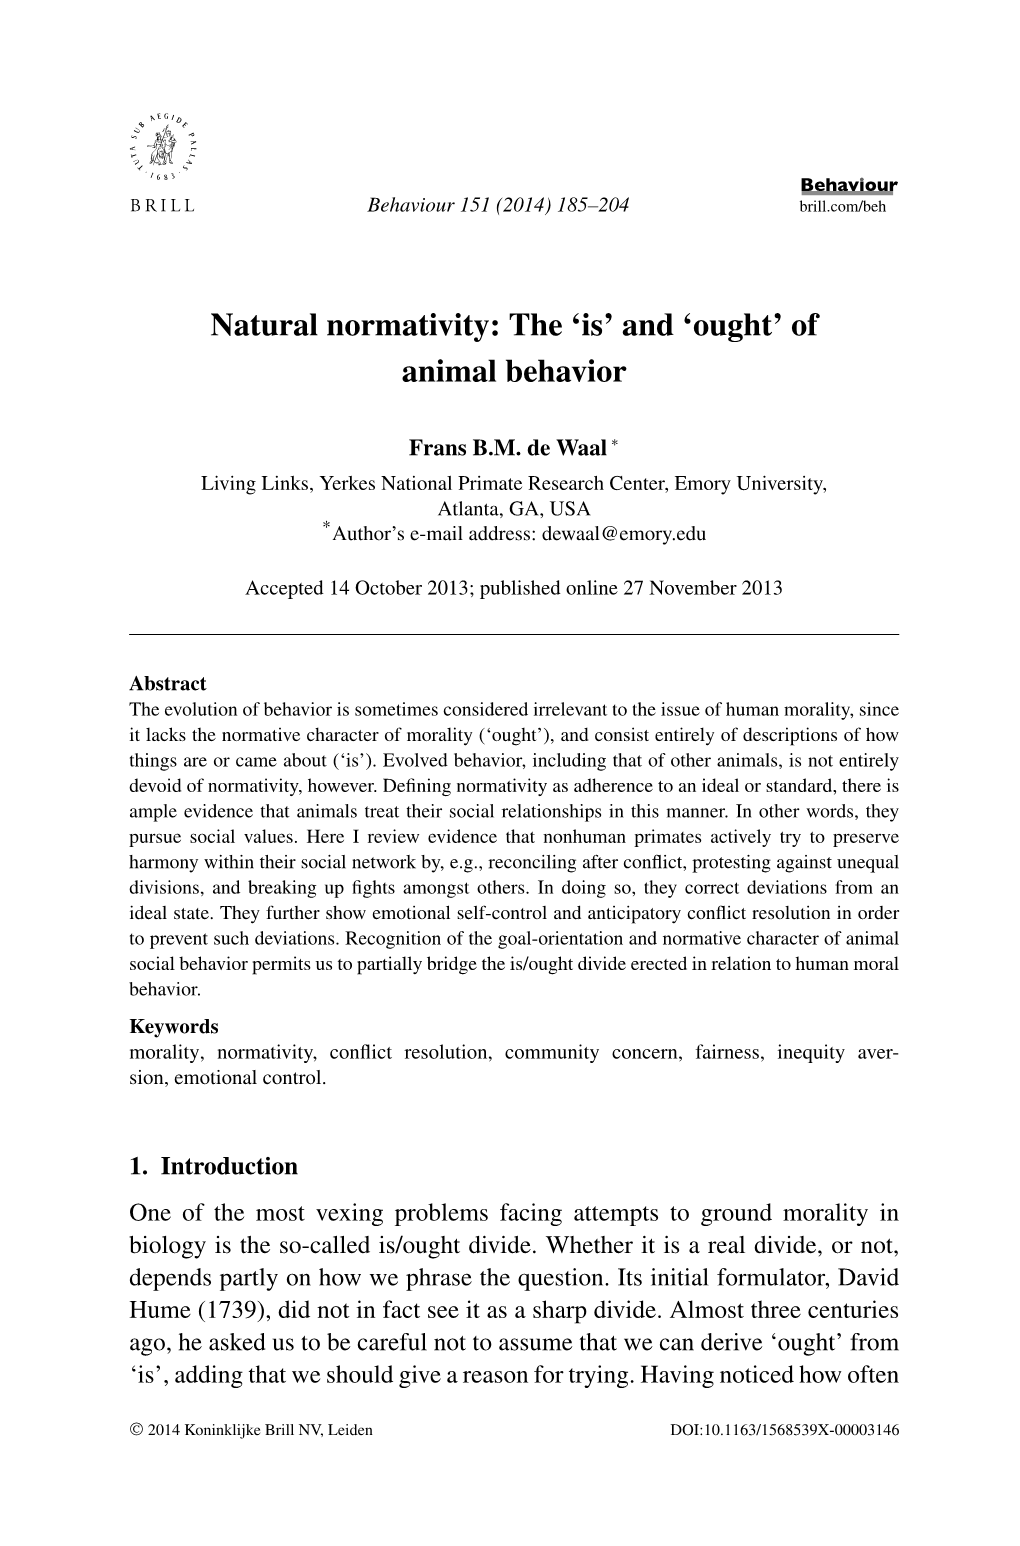 Natural Normativity: the 'Is' and 'Ought' of Animal Behavior